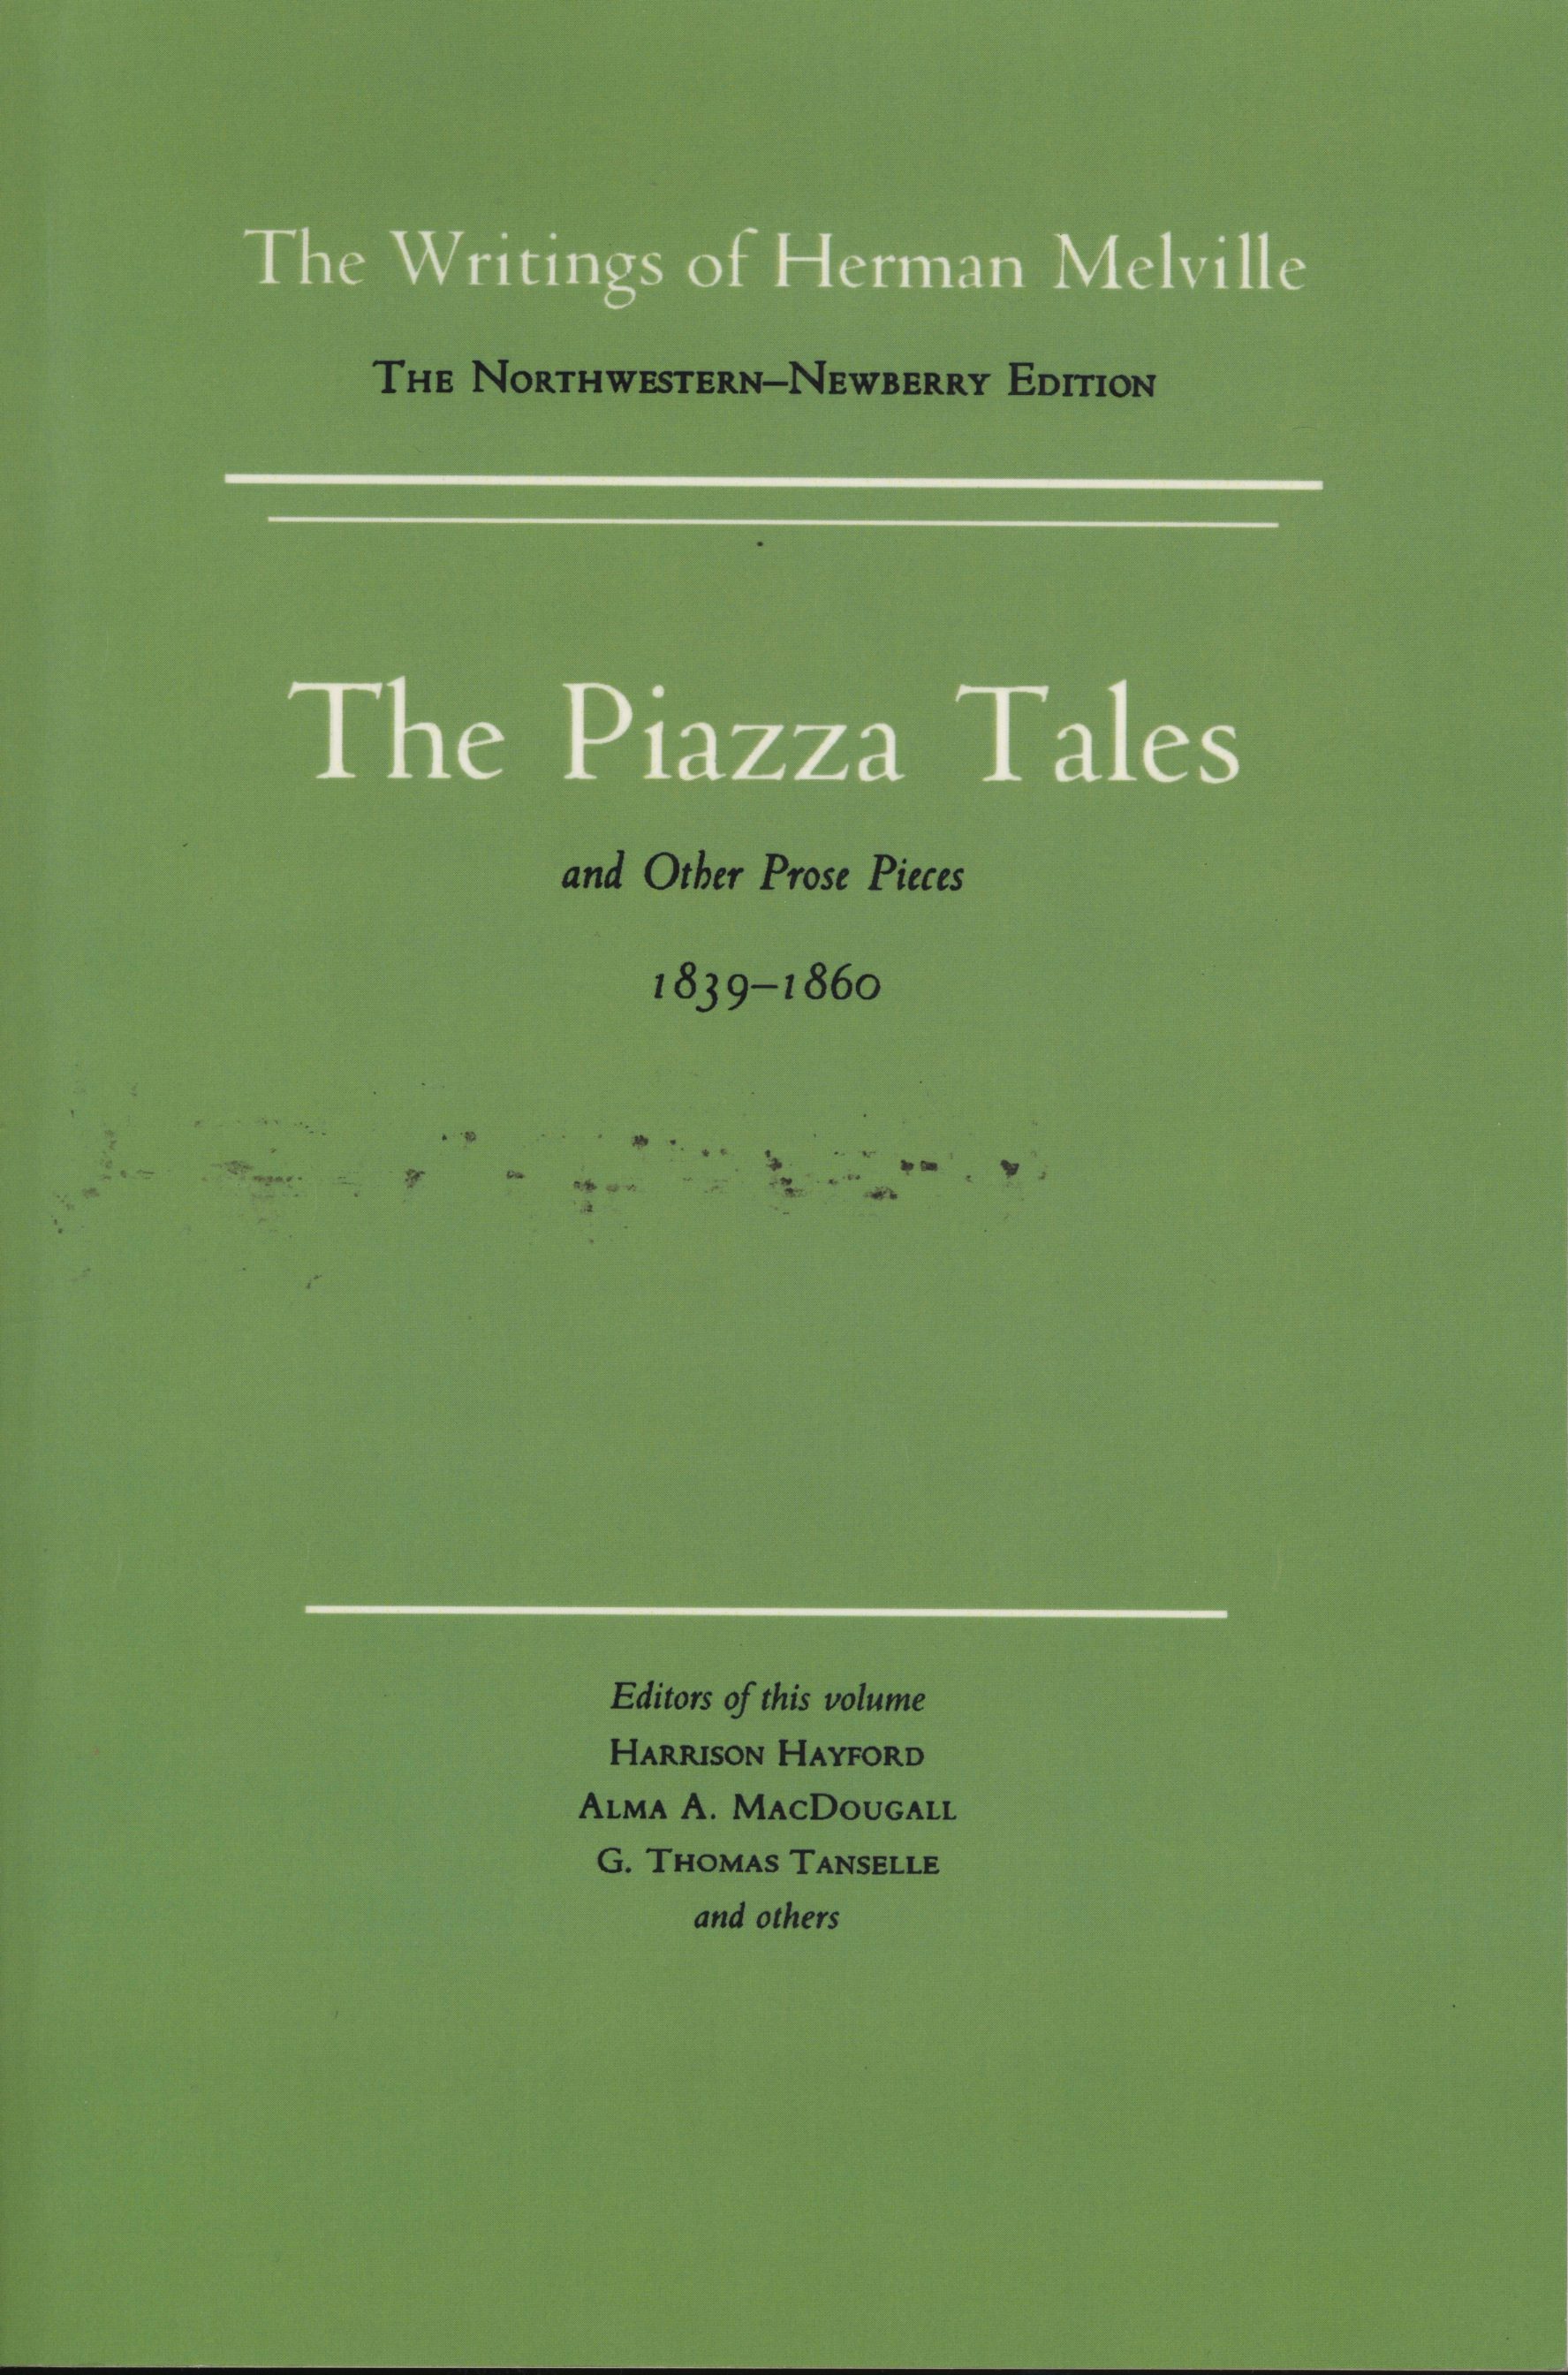 The Piazza Tales and Other Prose Pieces, 1839-1860 - Northwestern 